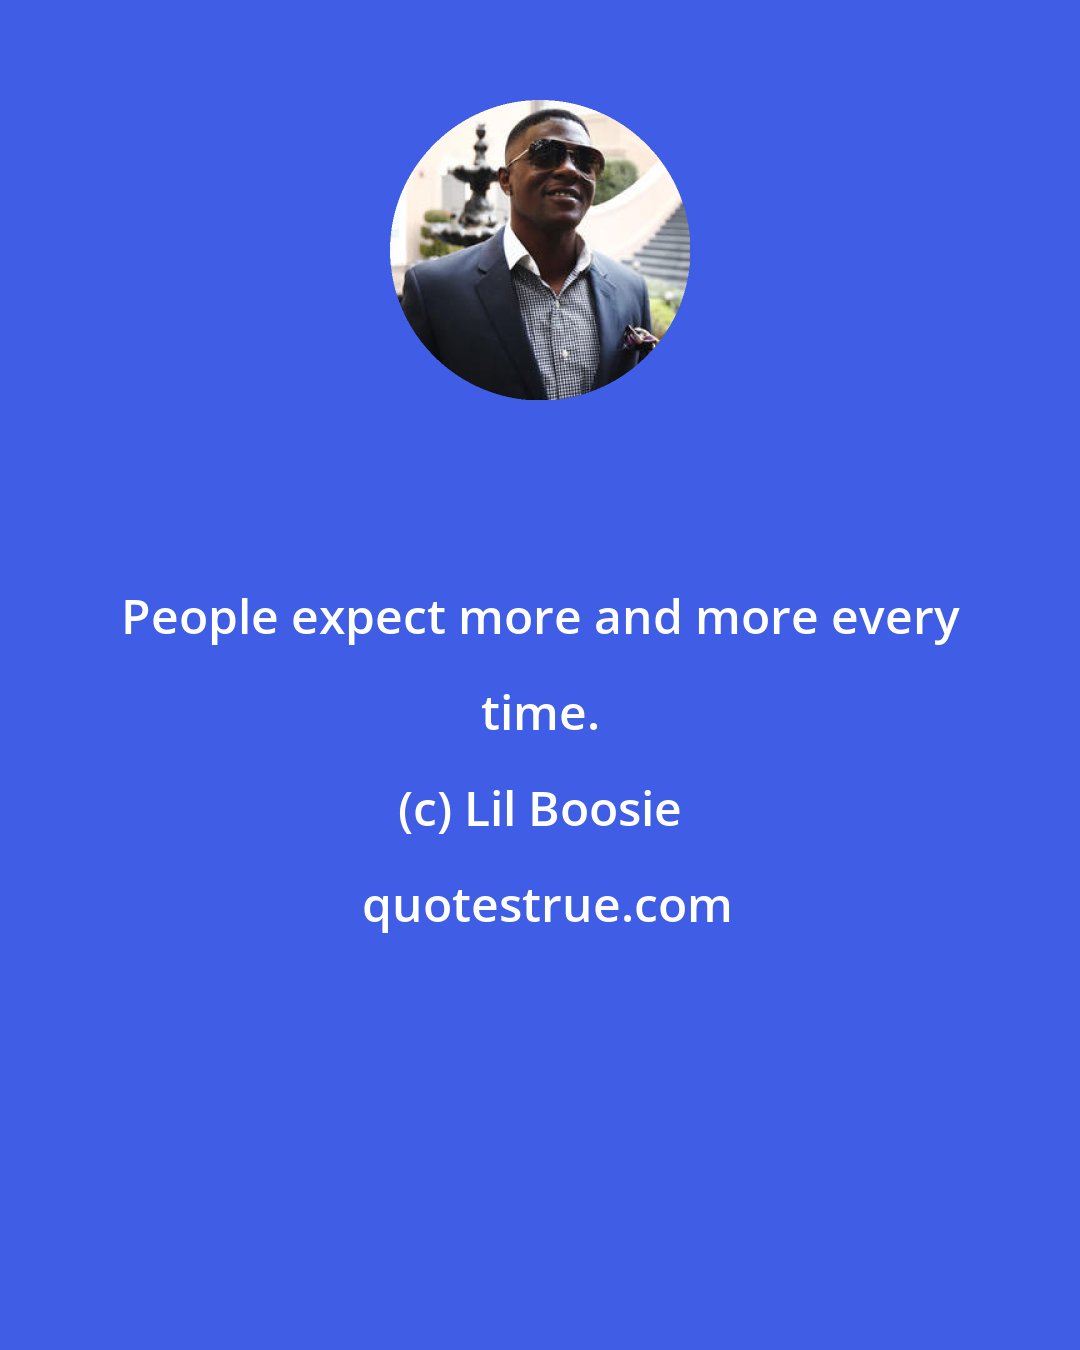 Lil Boosie: People expect more and more every time.